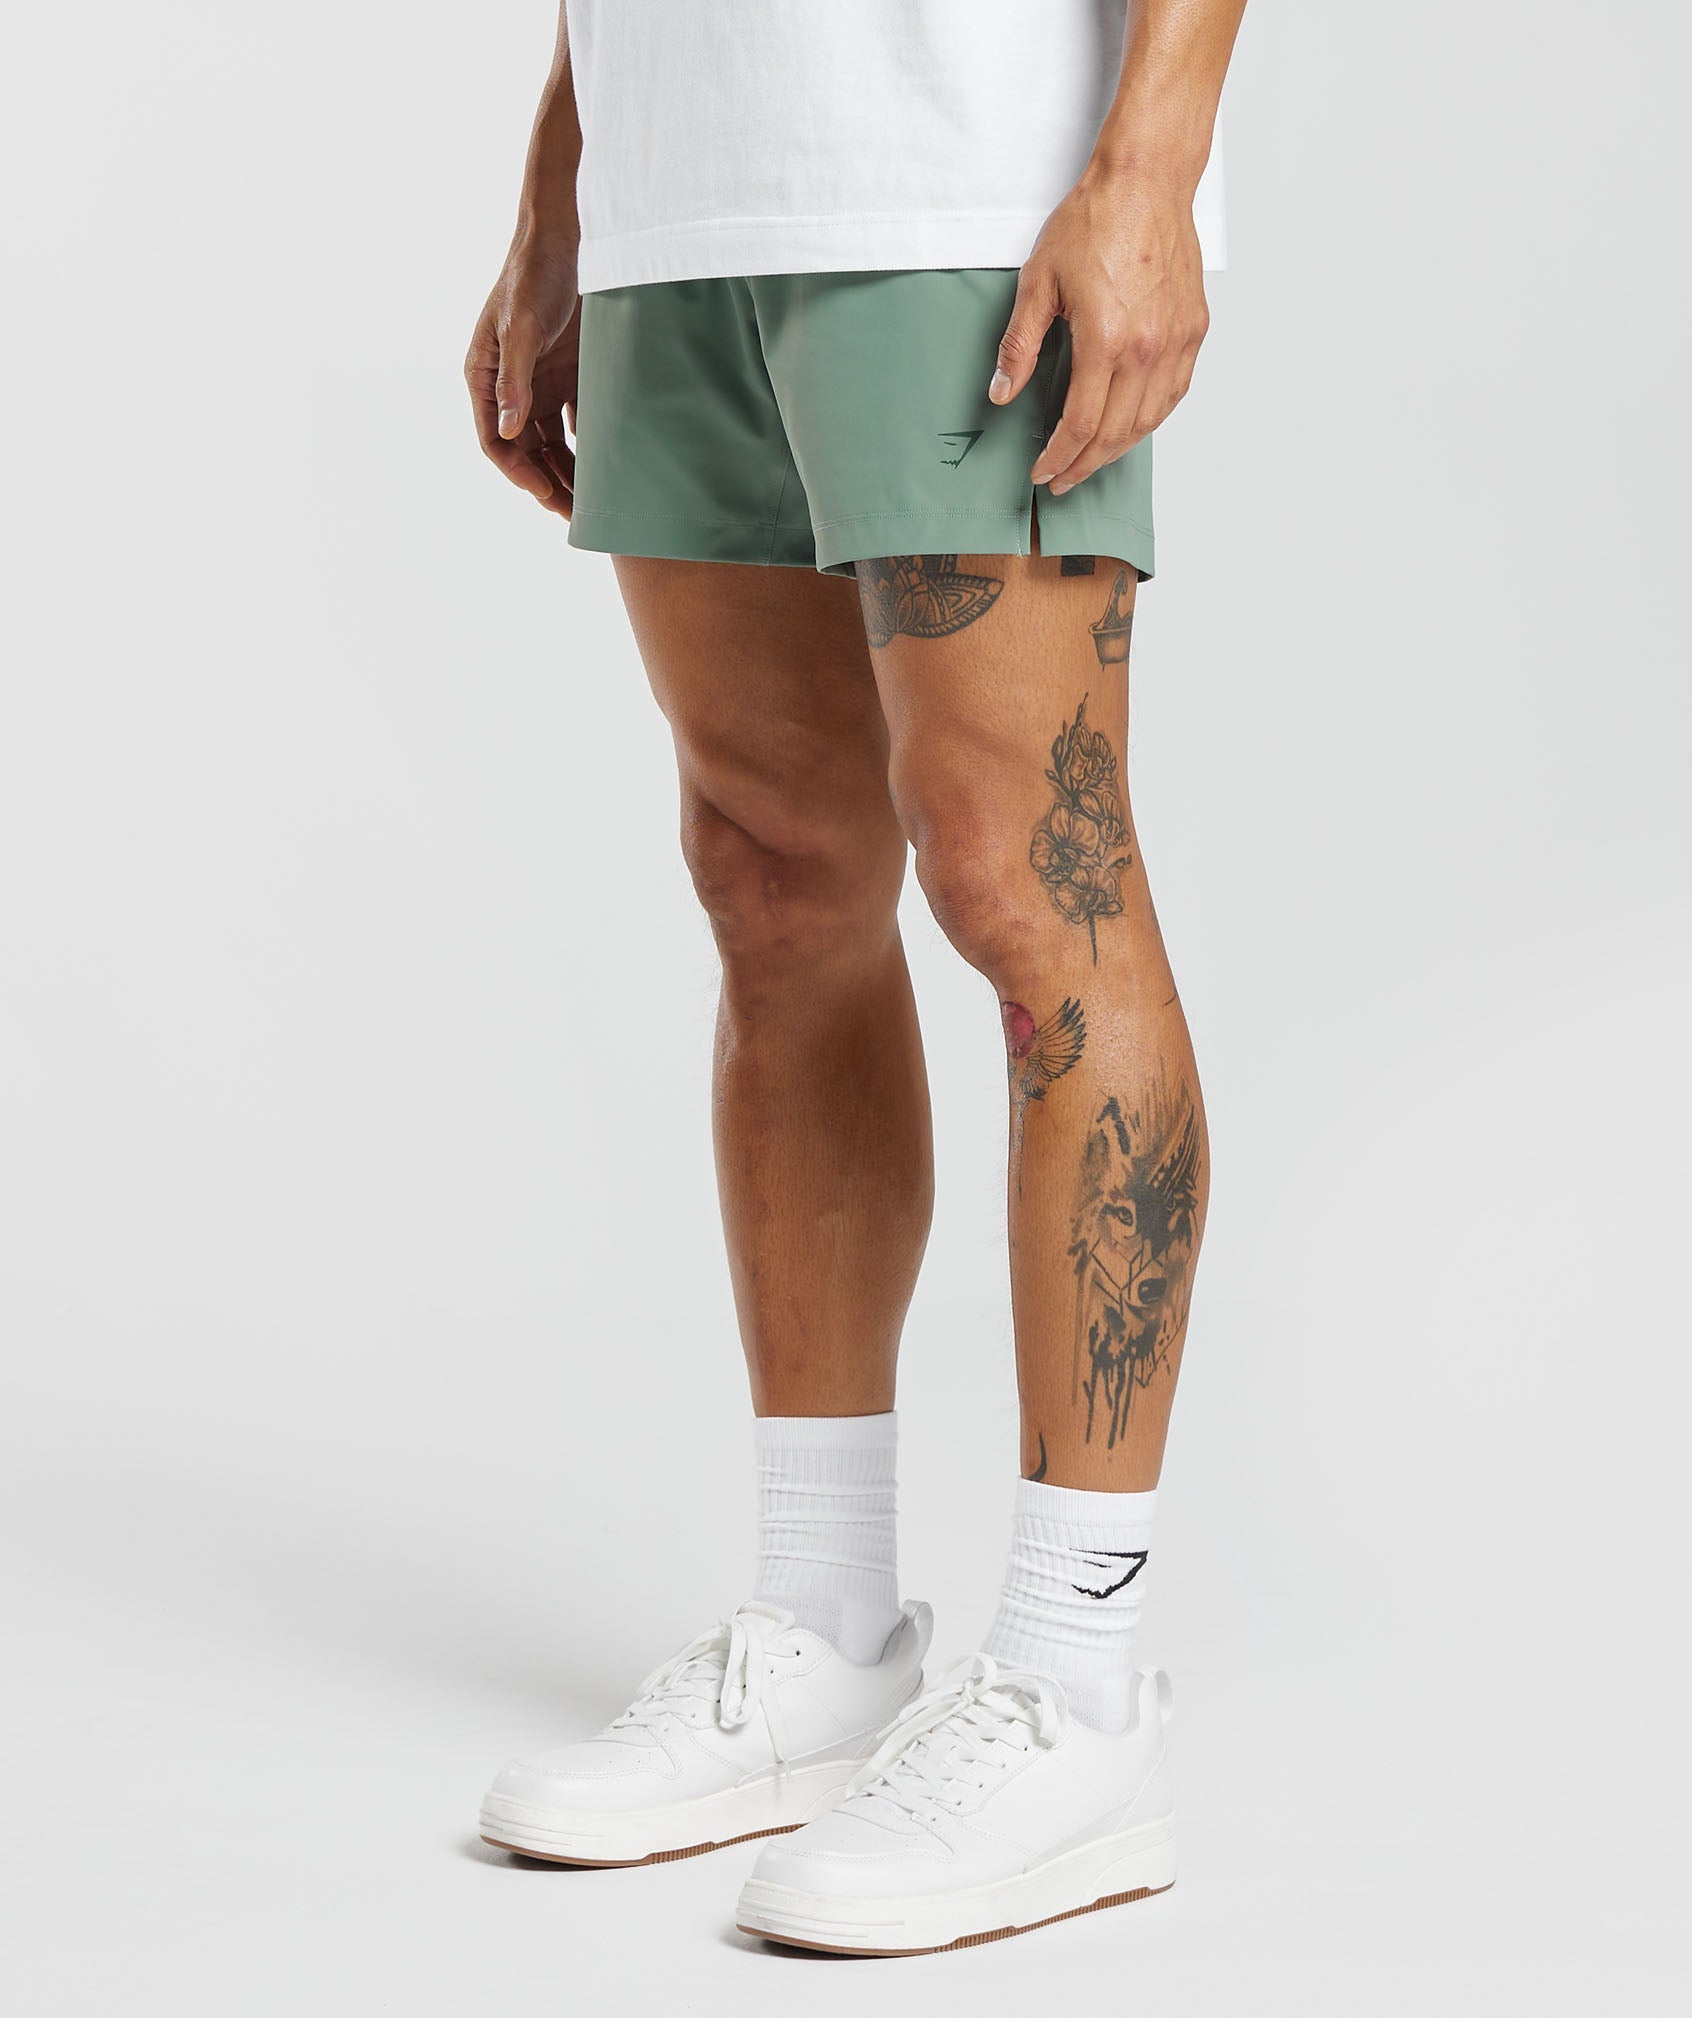 Studio Shorts in Willow Green - view 3